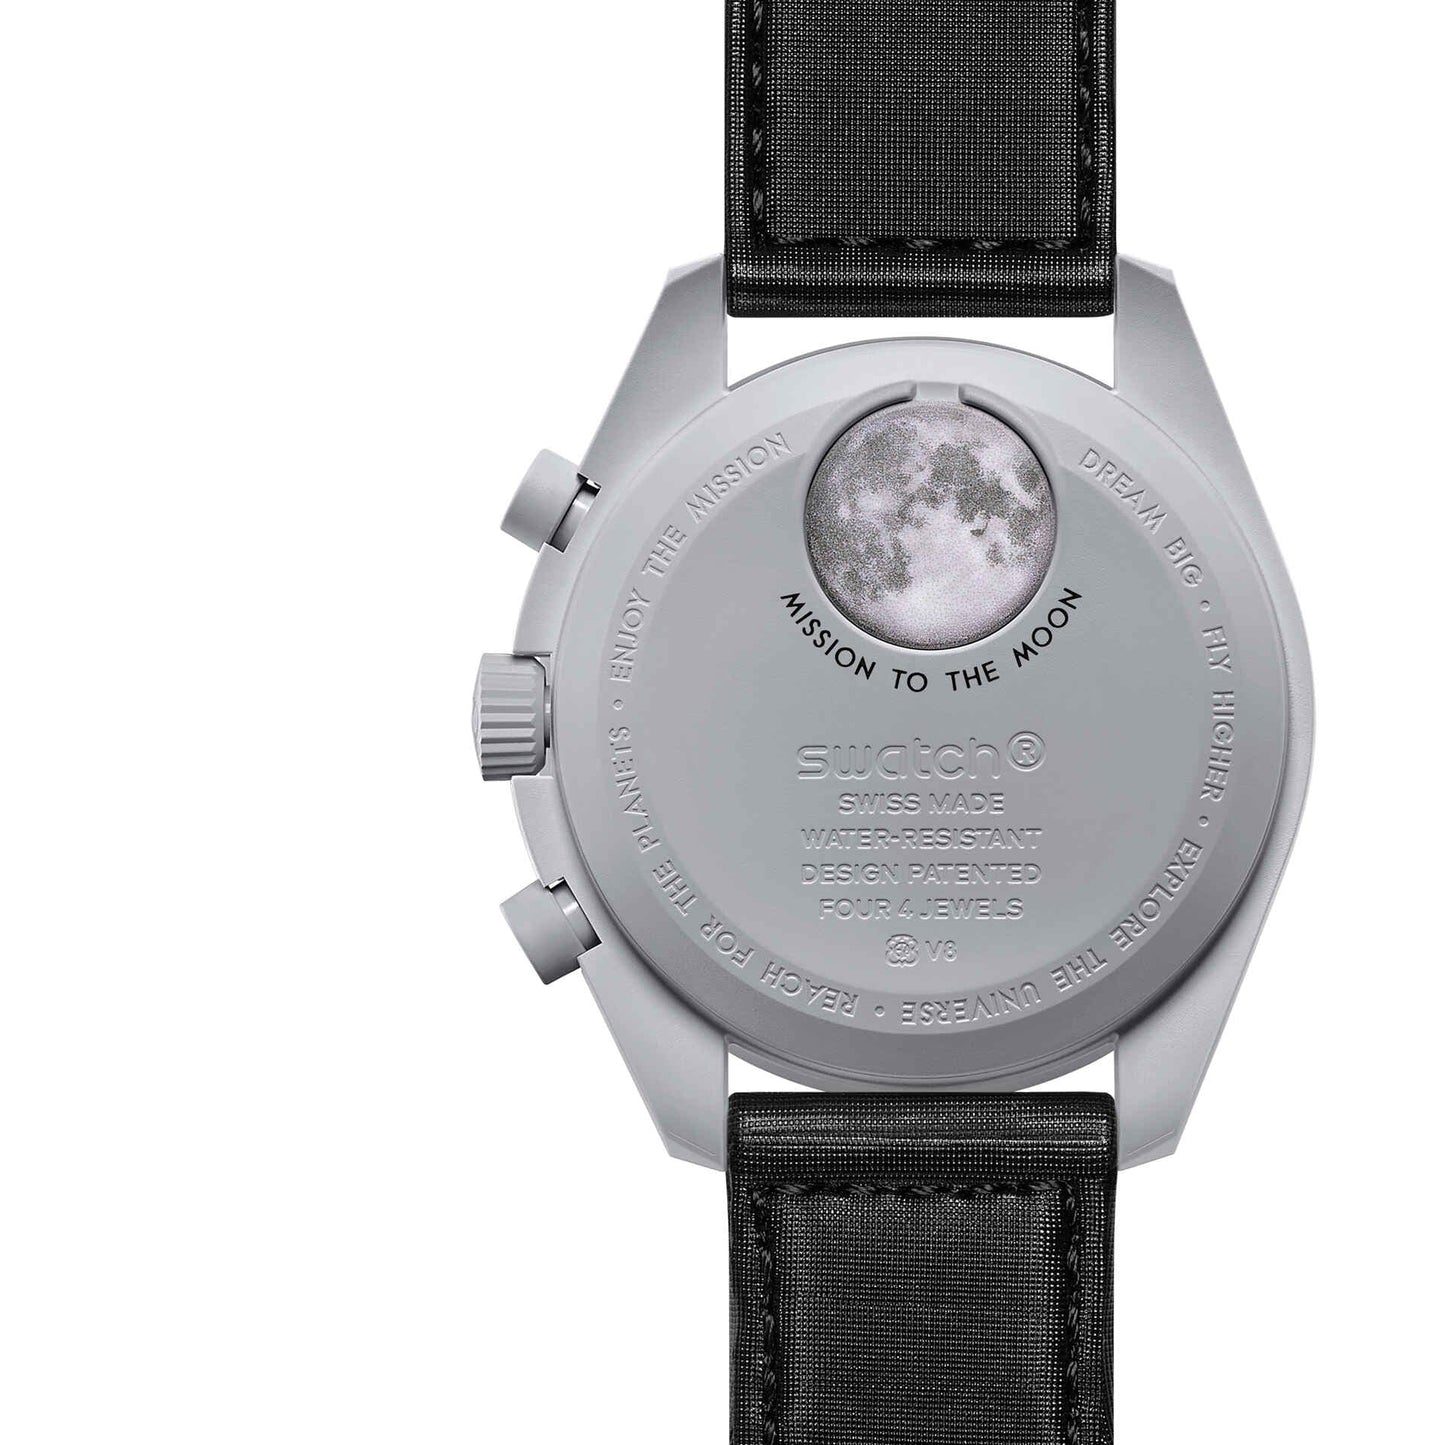 Omega x Swatch MISSION TO THE MOON